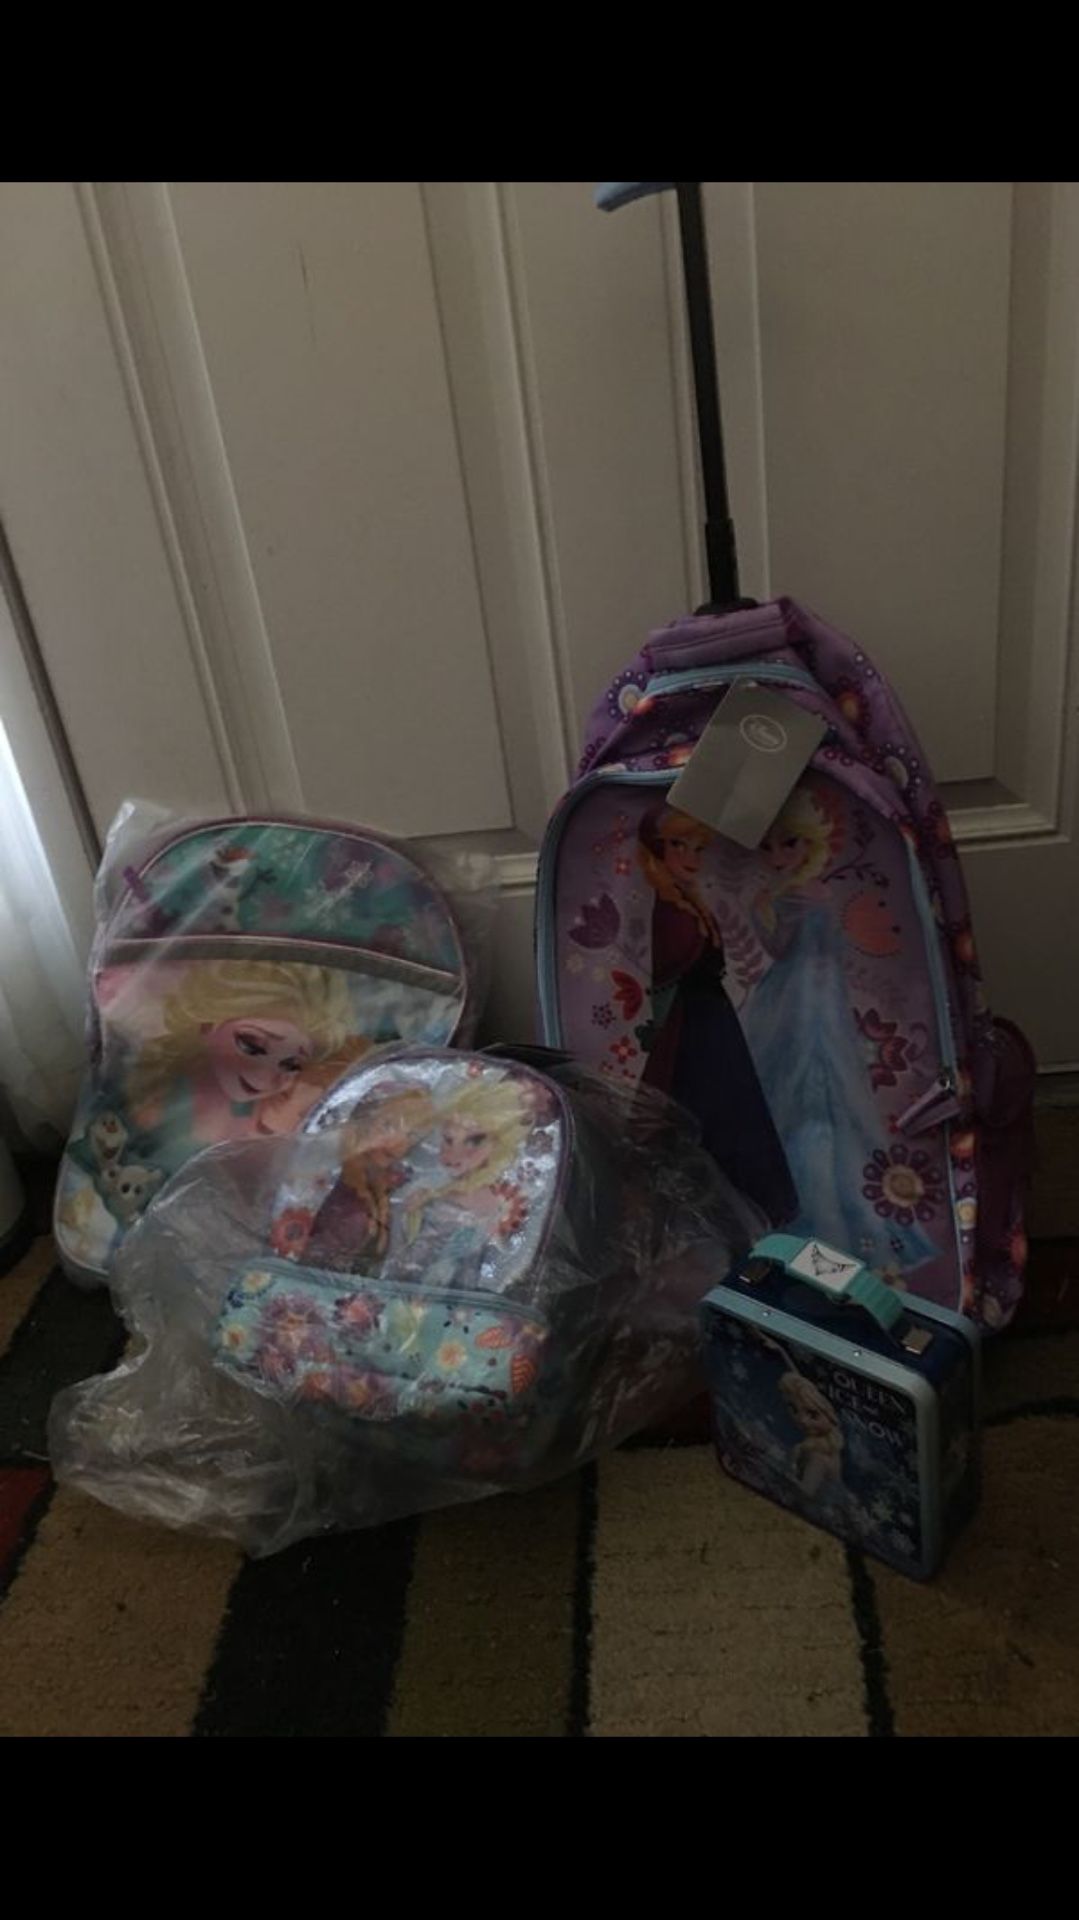 Brand New Disney Frozen Elsa and Anna Backpack, Lunchbox and Travel Suitcase/Backpack w/ wheels New w/ Tags. Great for back to school!